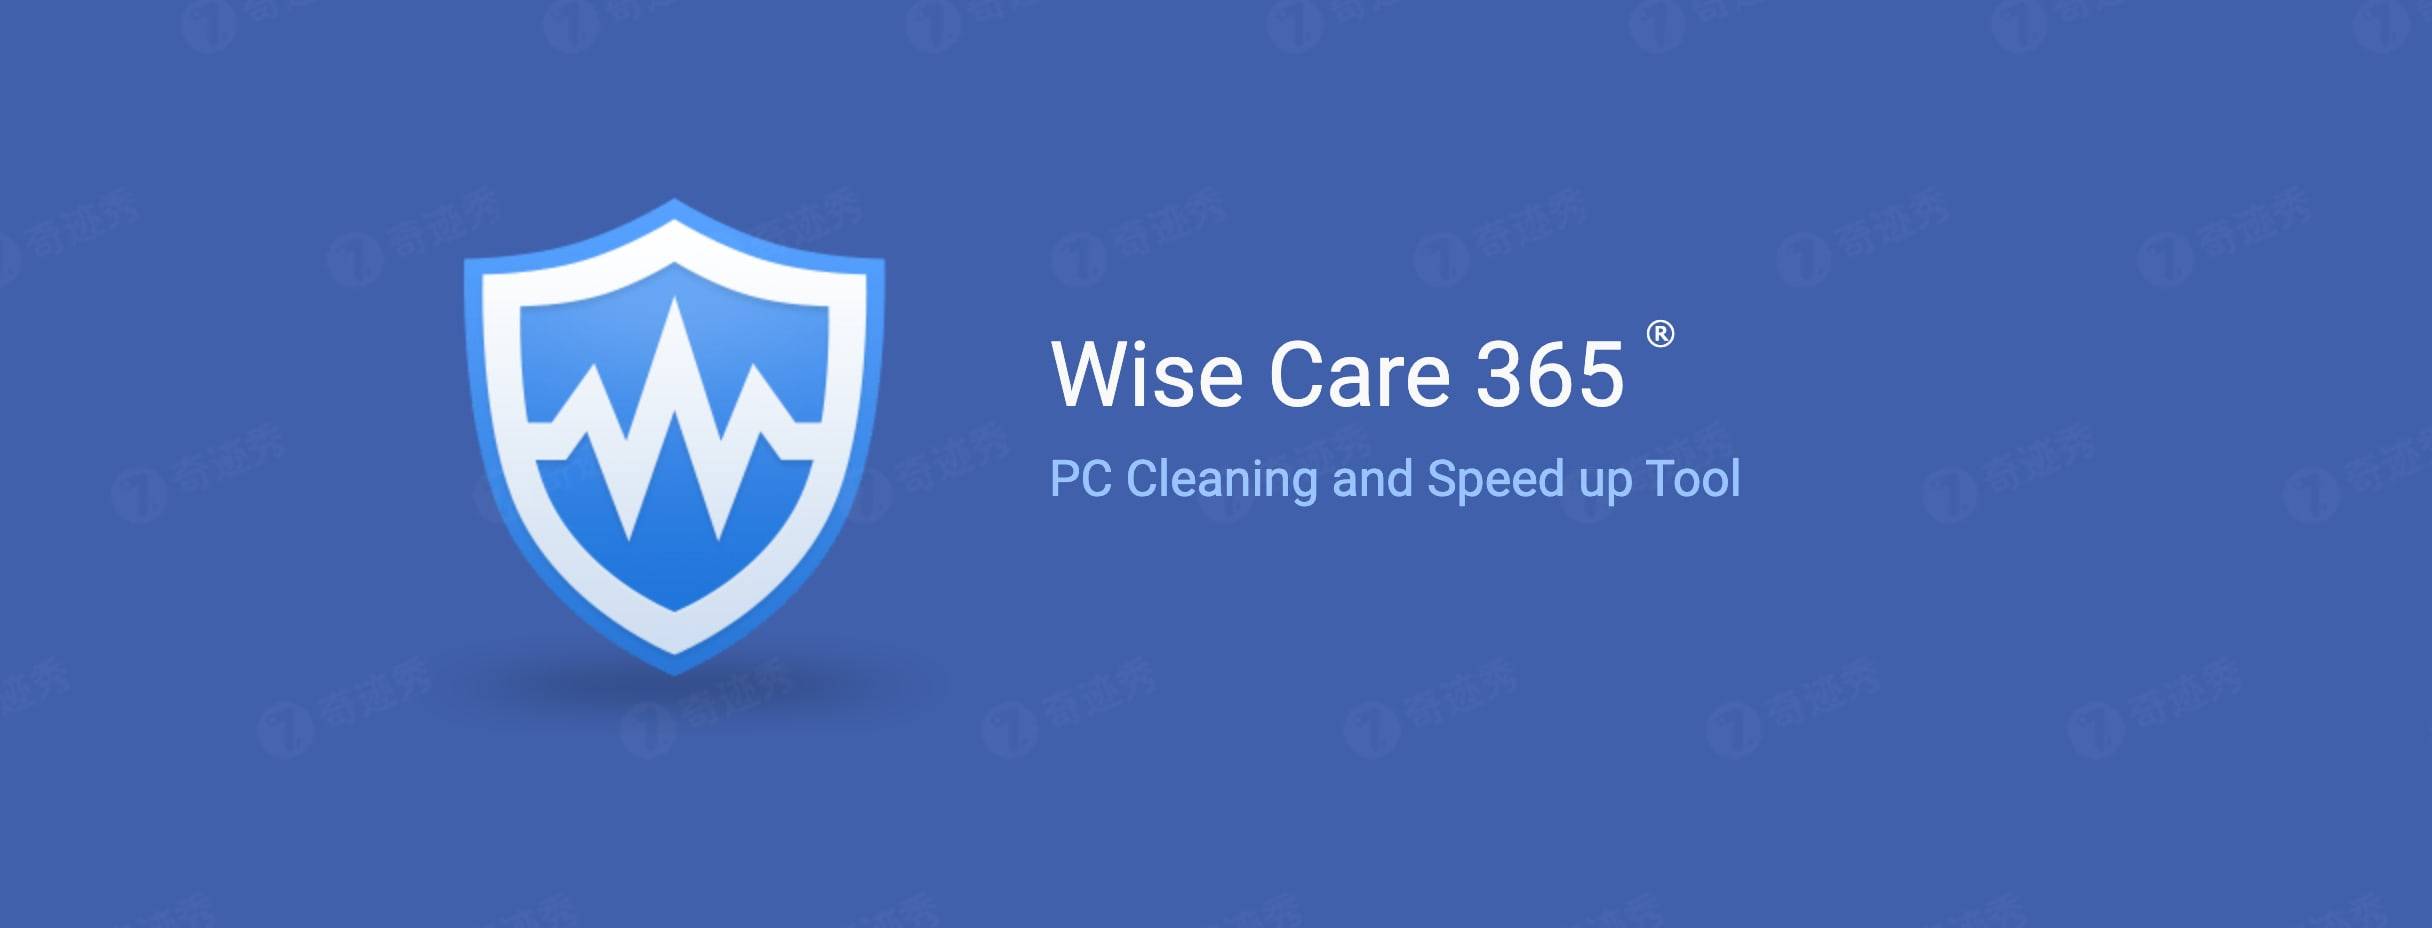 Wise Care 365插图